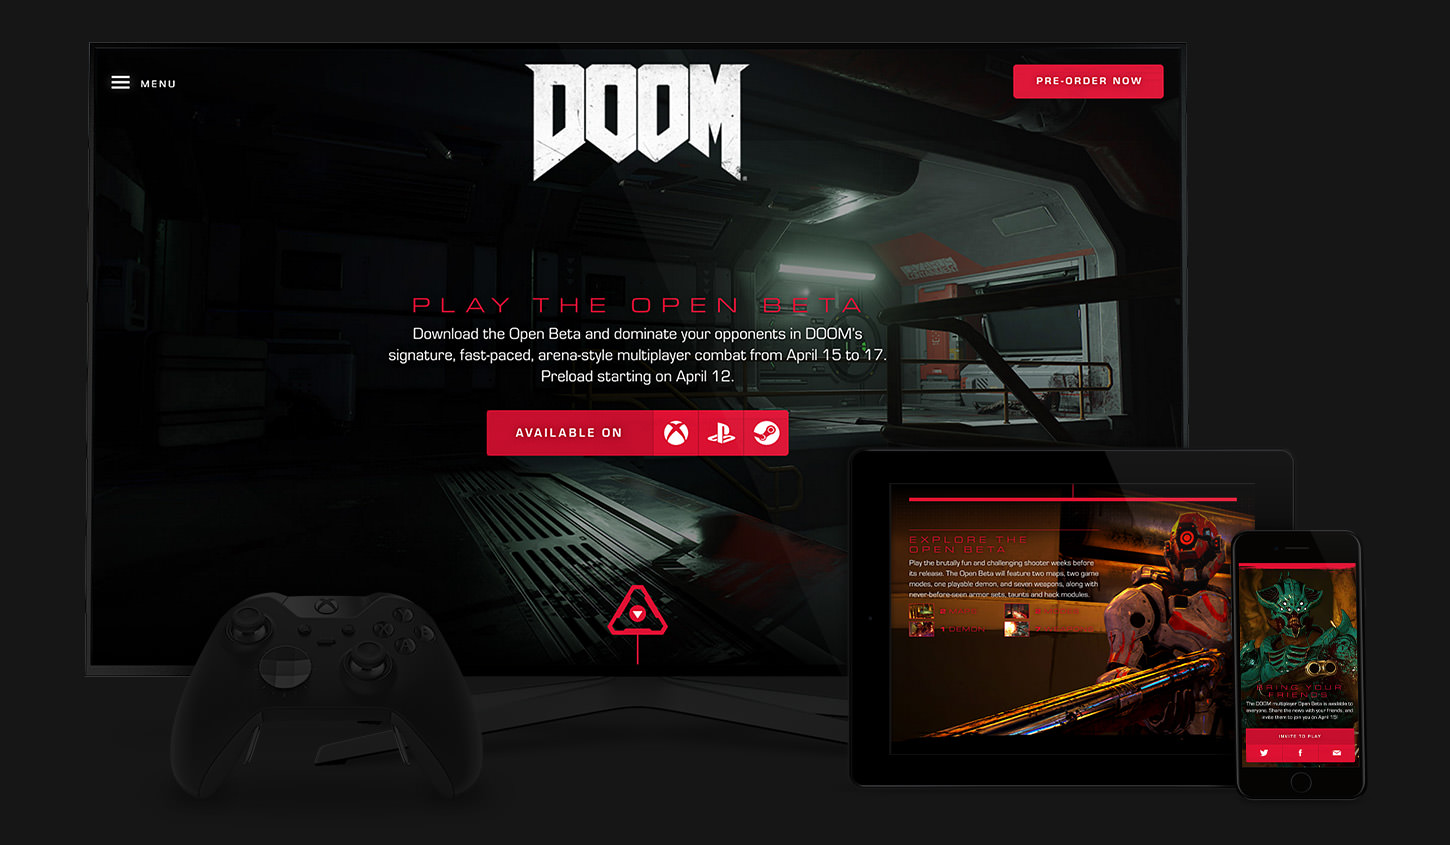 The DOOM site displayed on a television, tablet, and phone